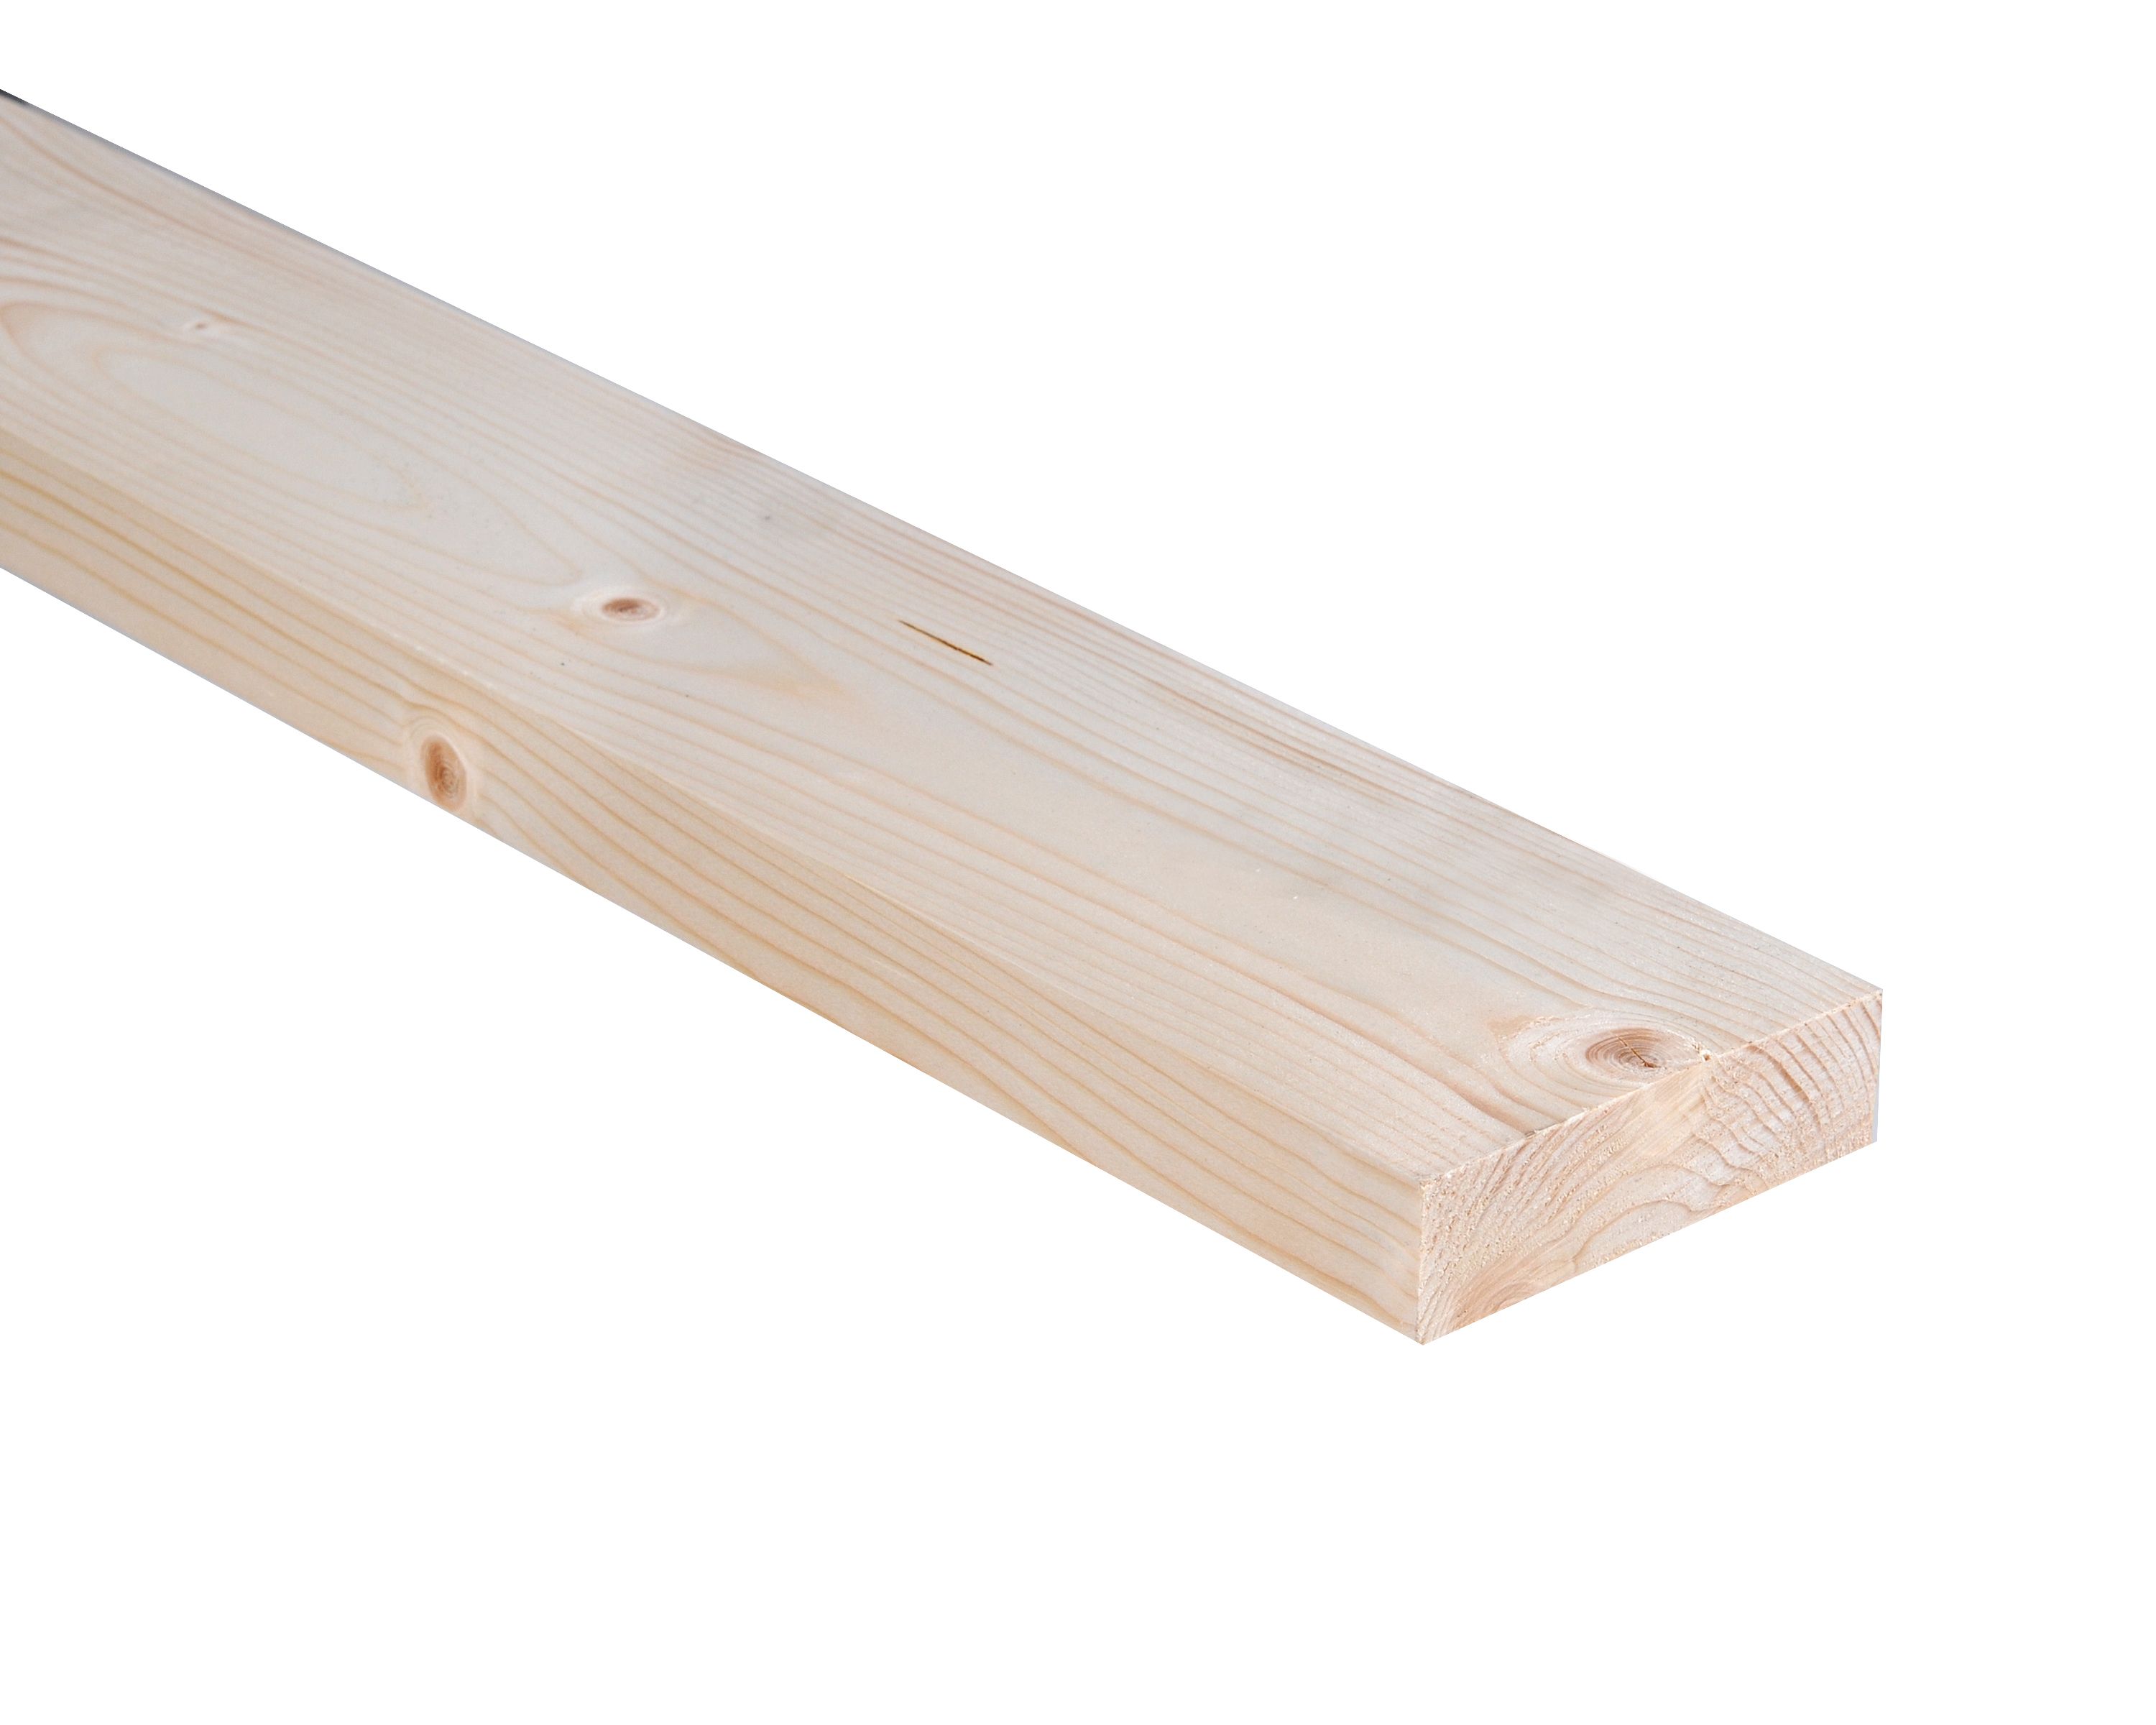 Smooth Planed Square edge Whitewood spruce Stick timber (L)2.4m (W)94mm (T)27mm, Pack of 4